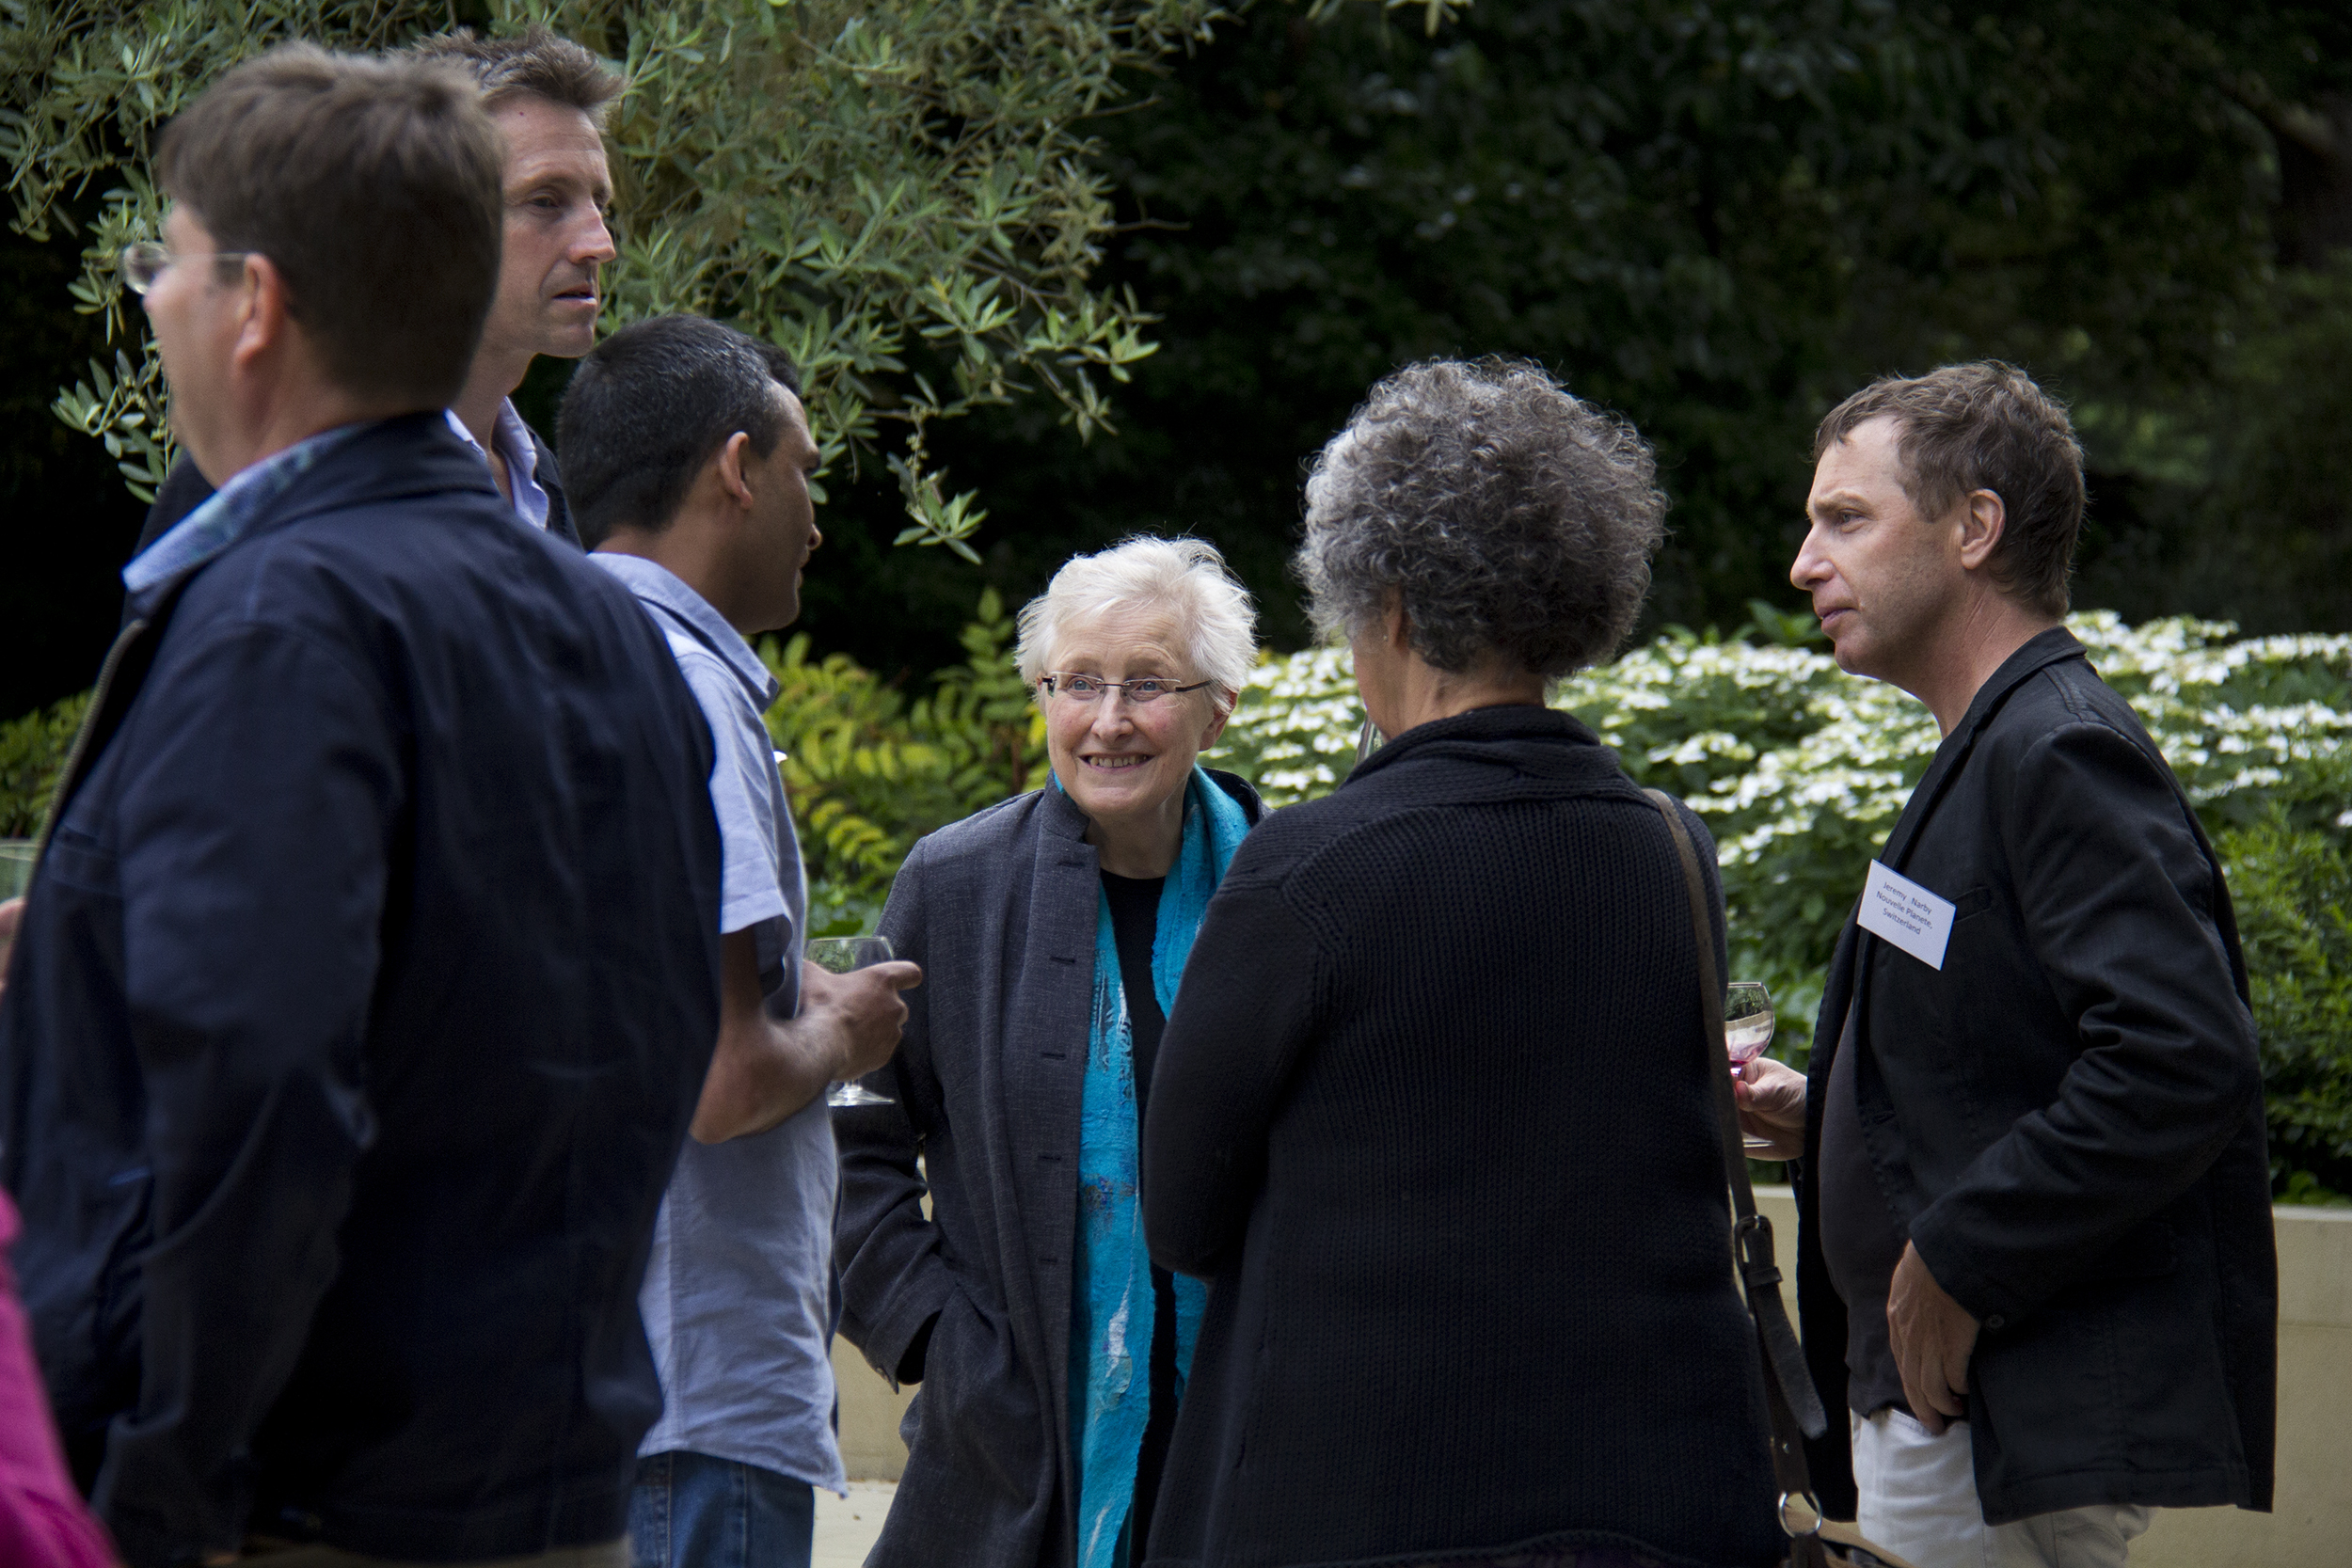 Dame Marilyn Strathern, Jeremy Narby, William Millken at the SLCU Evening Reception